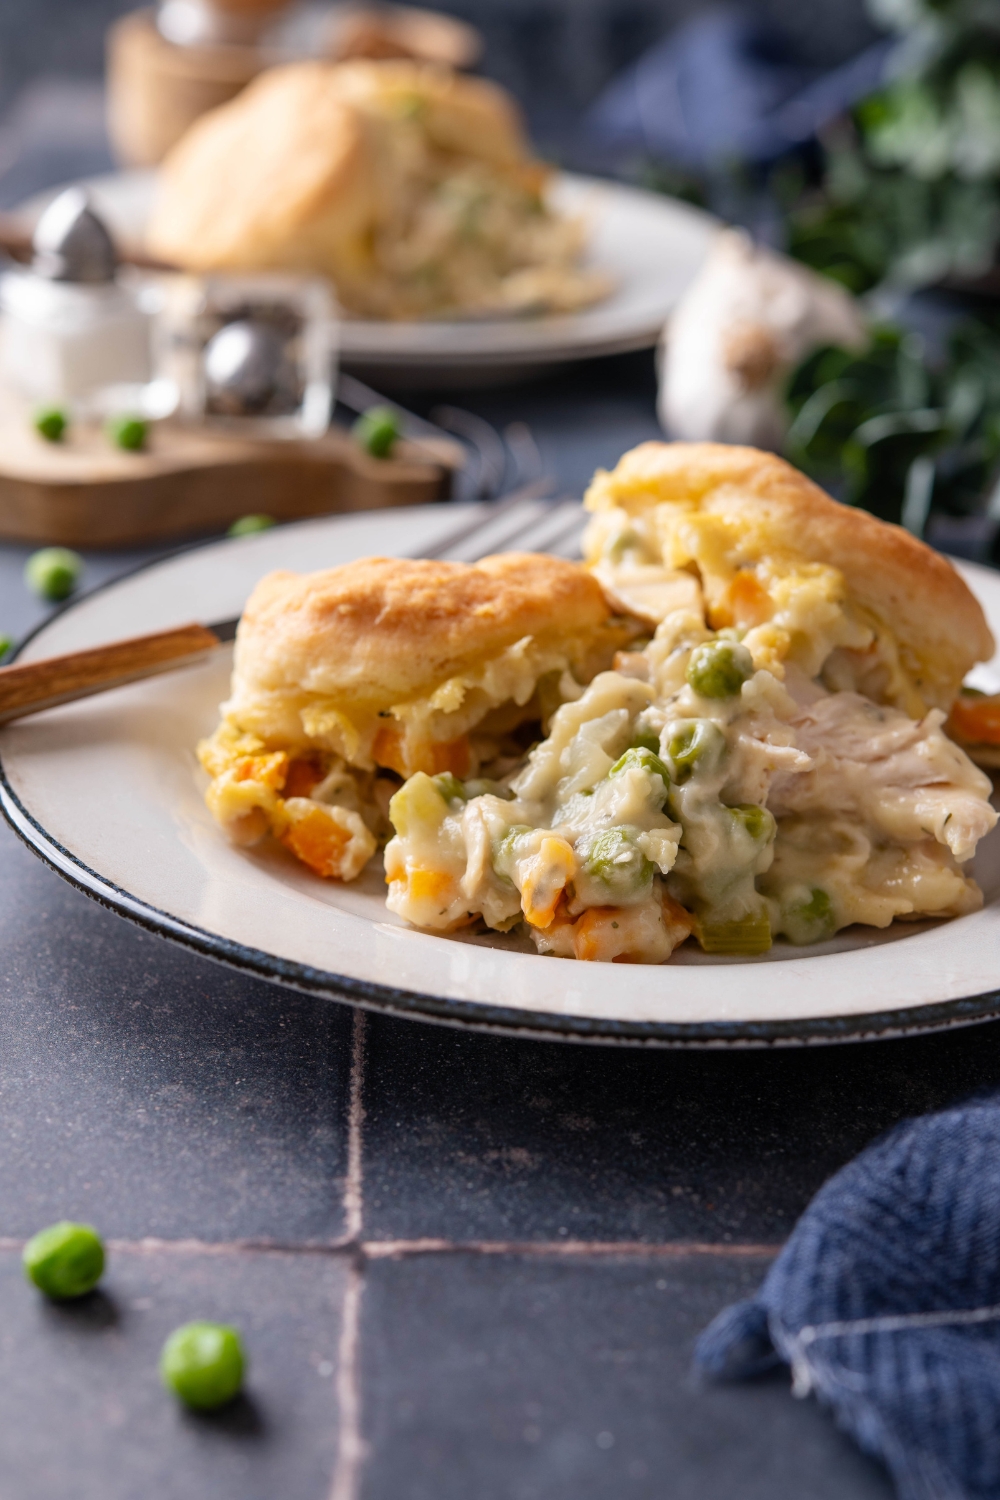 A completed dish of chicken pot pie on a white plate with a fork.